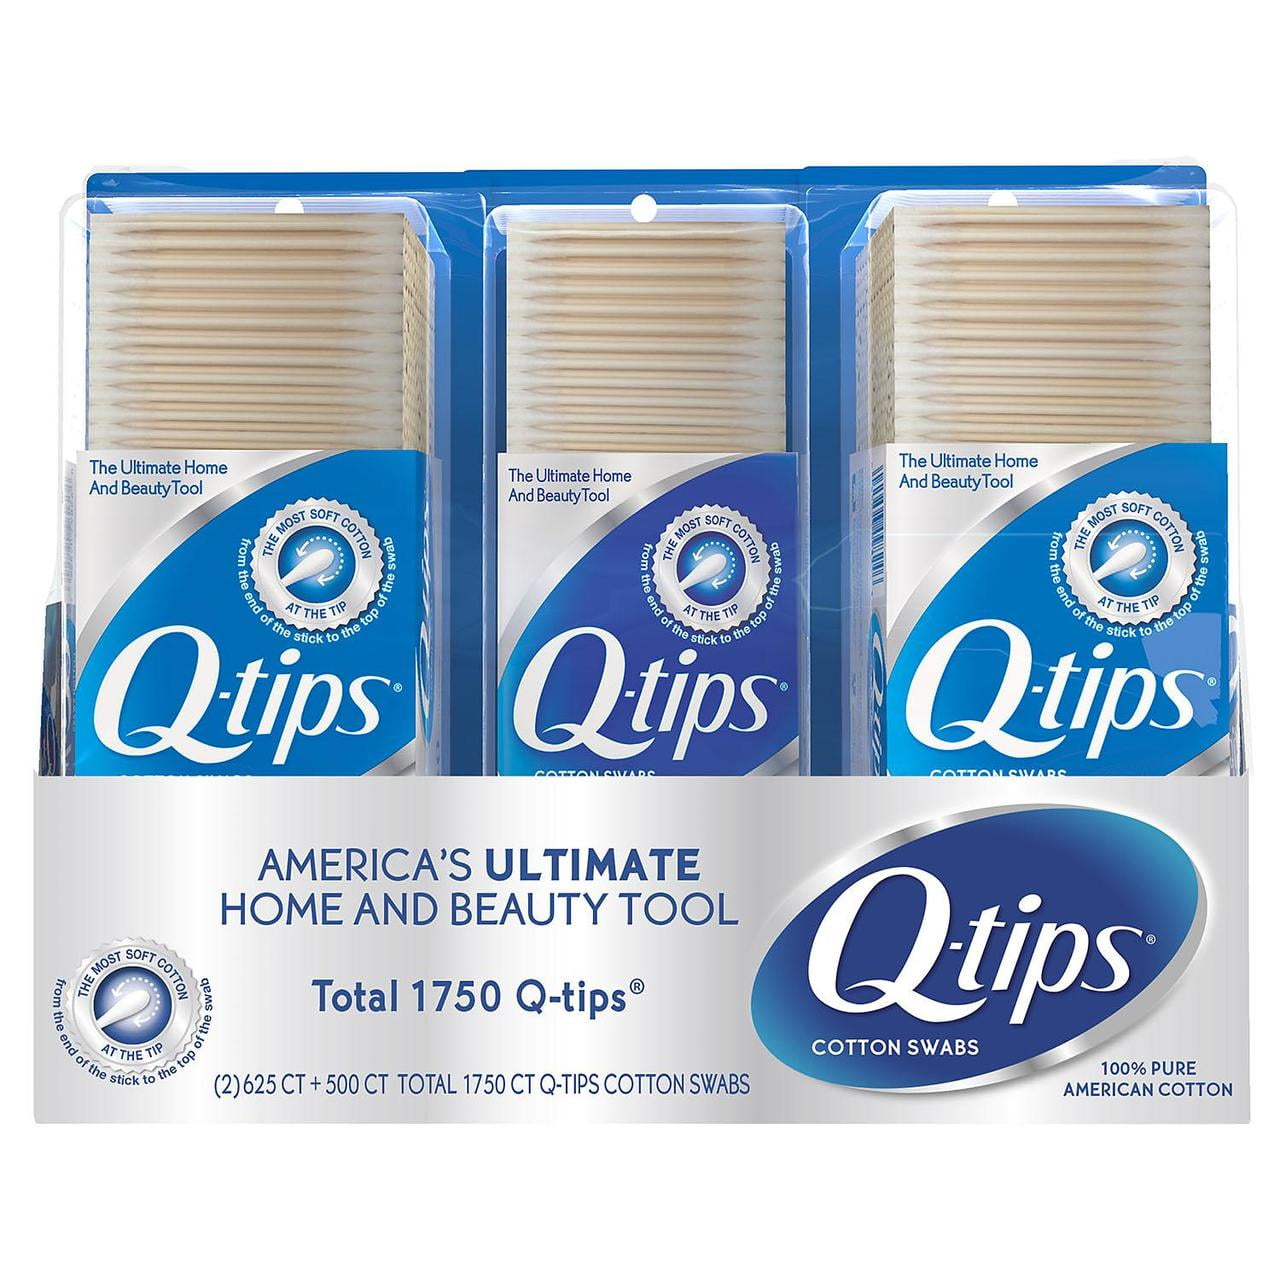 Vintage Q-Tips Cotton Swabs 10 Count Travel Pack Box lot of 2